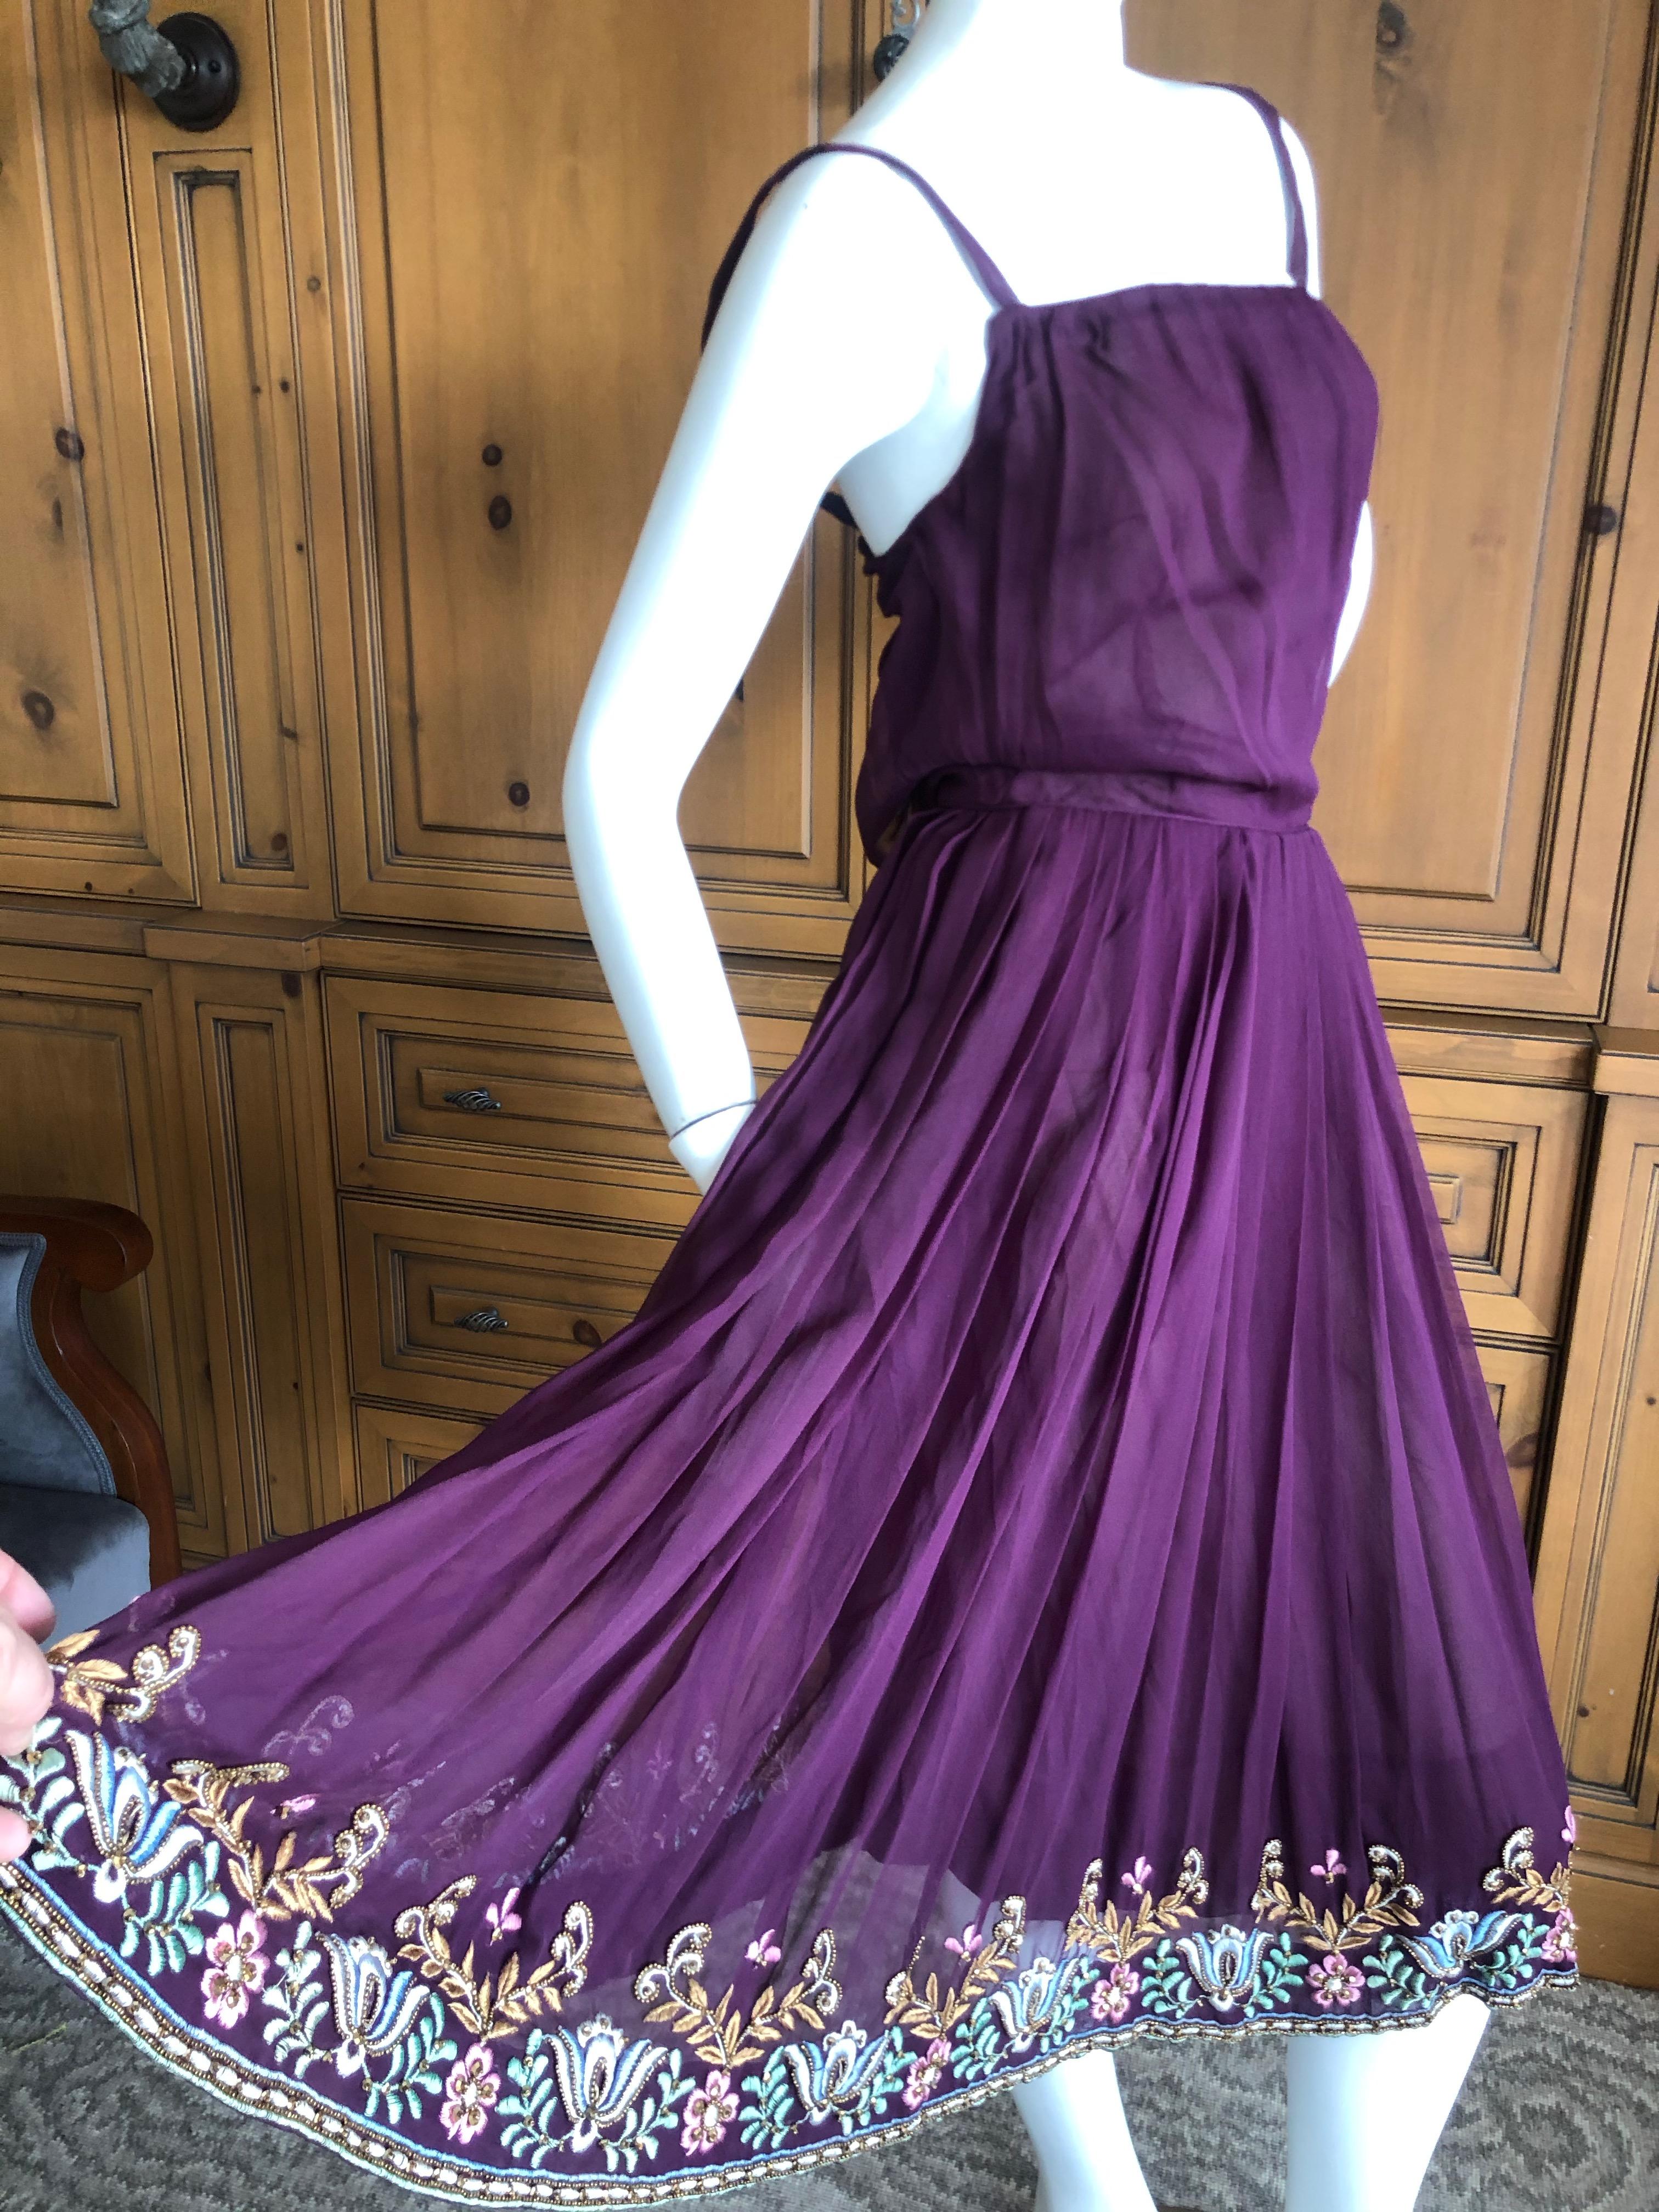 Christian Dior London 1960's Numbered Haute Couture Dress w Lesage Embellishment For Sale 3